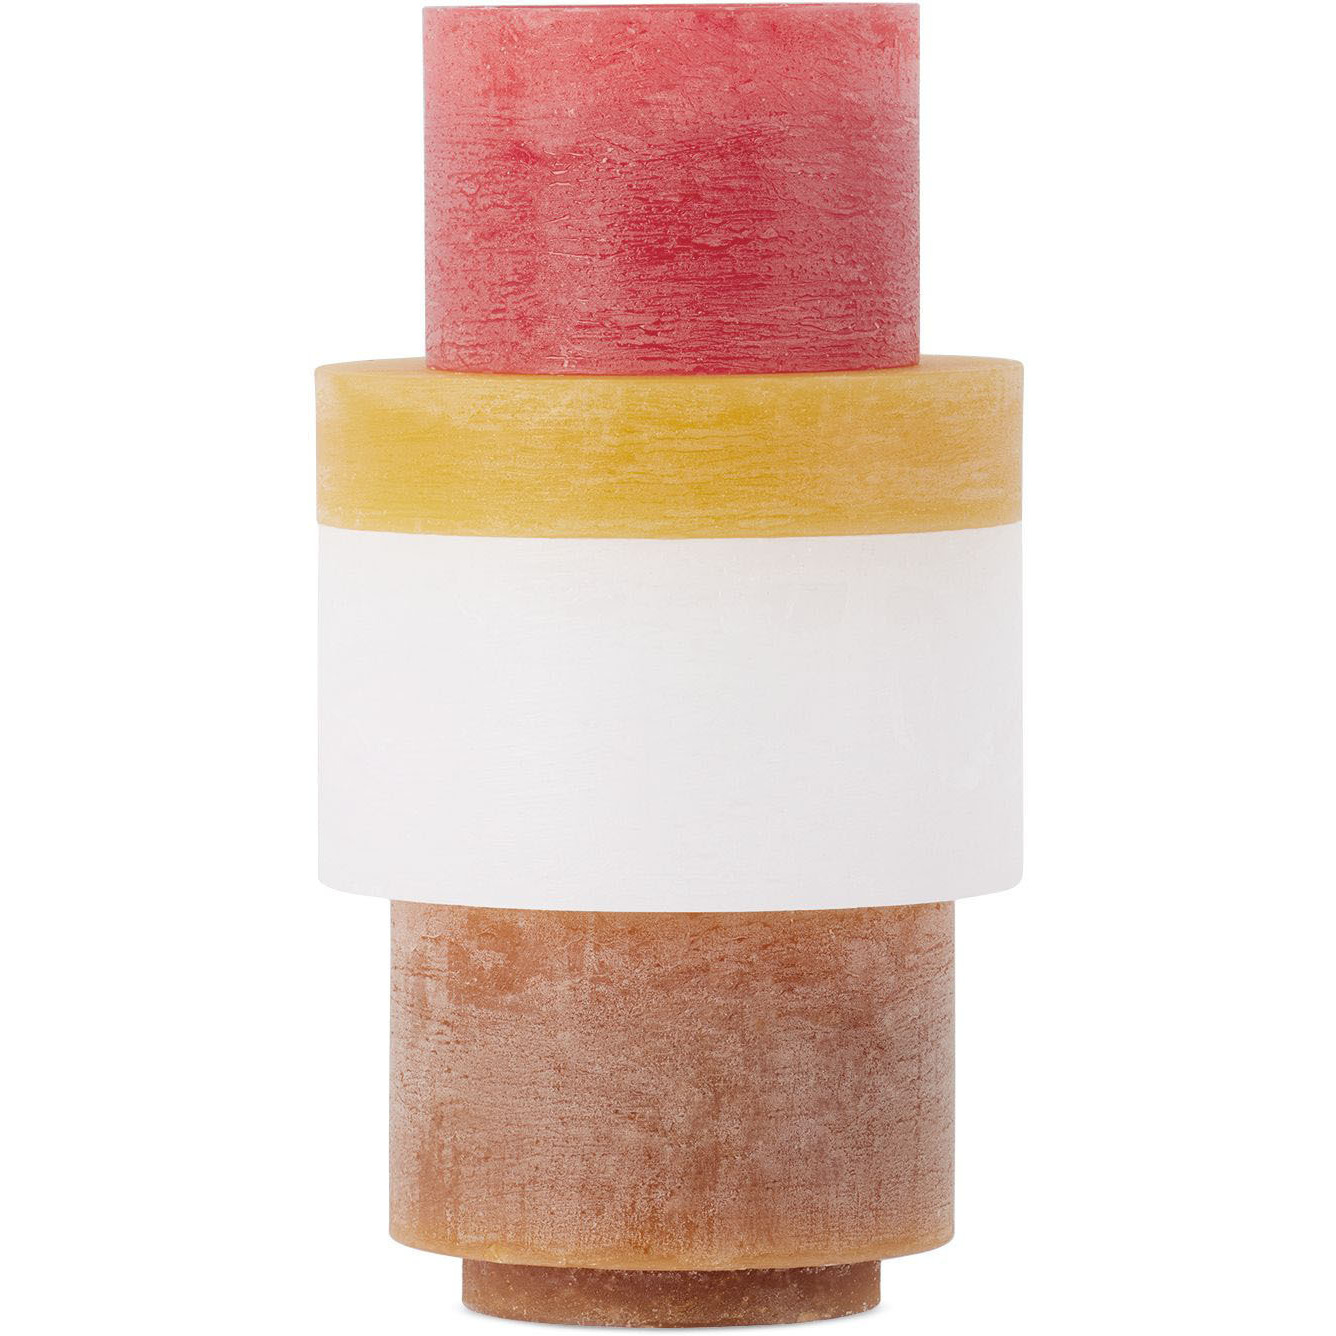 Stan Editions Multicolor Stack 05 Candle Set - image 1